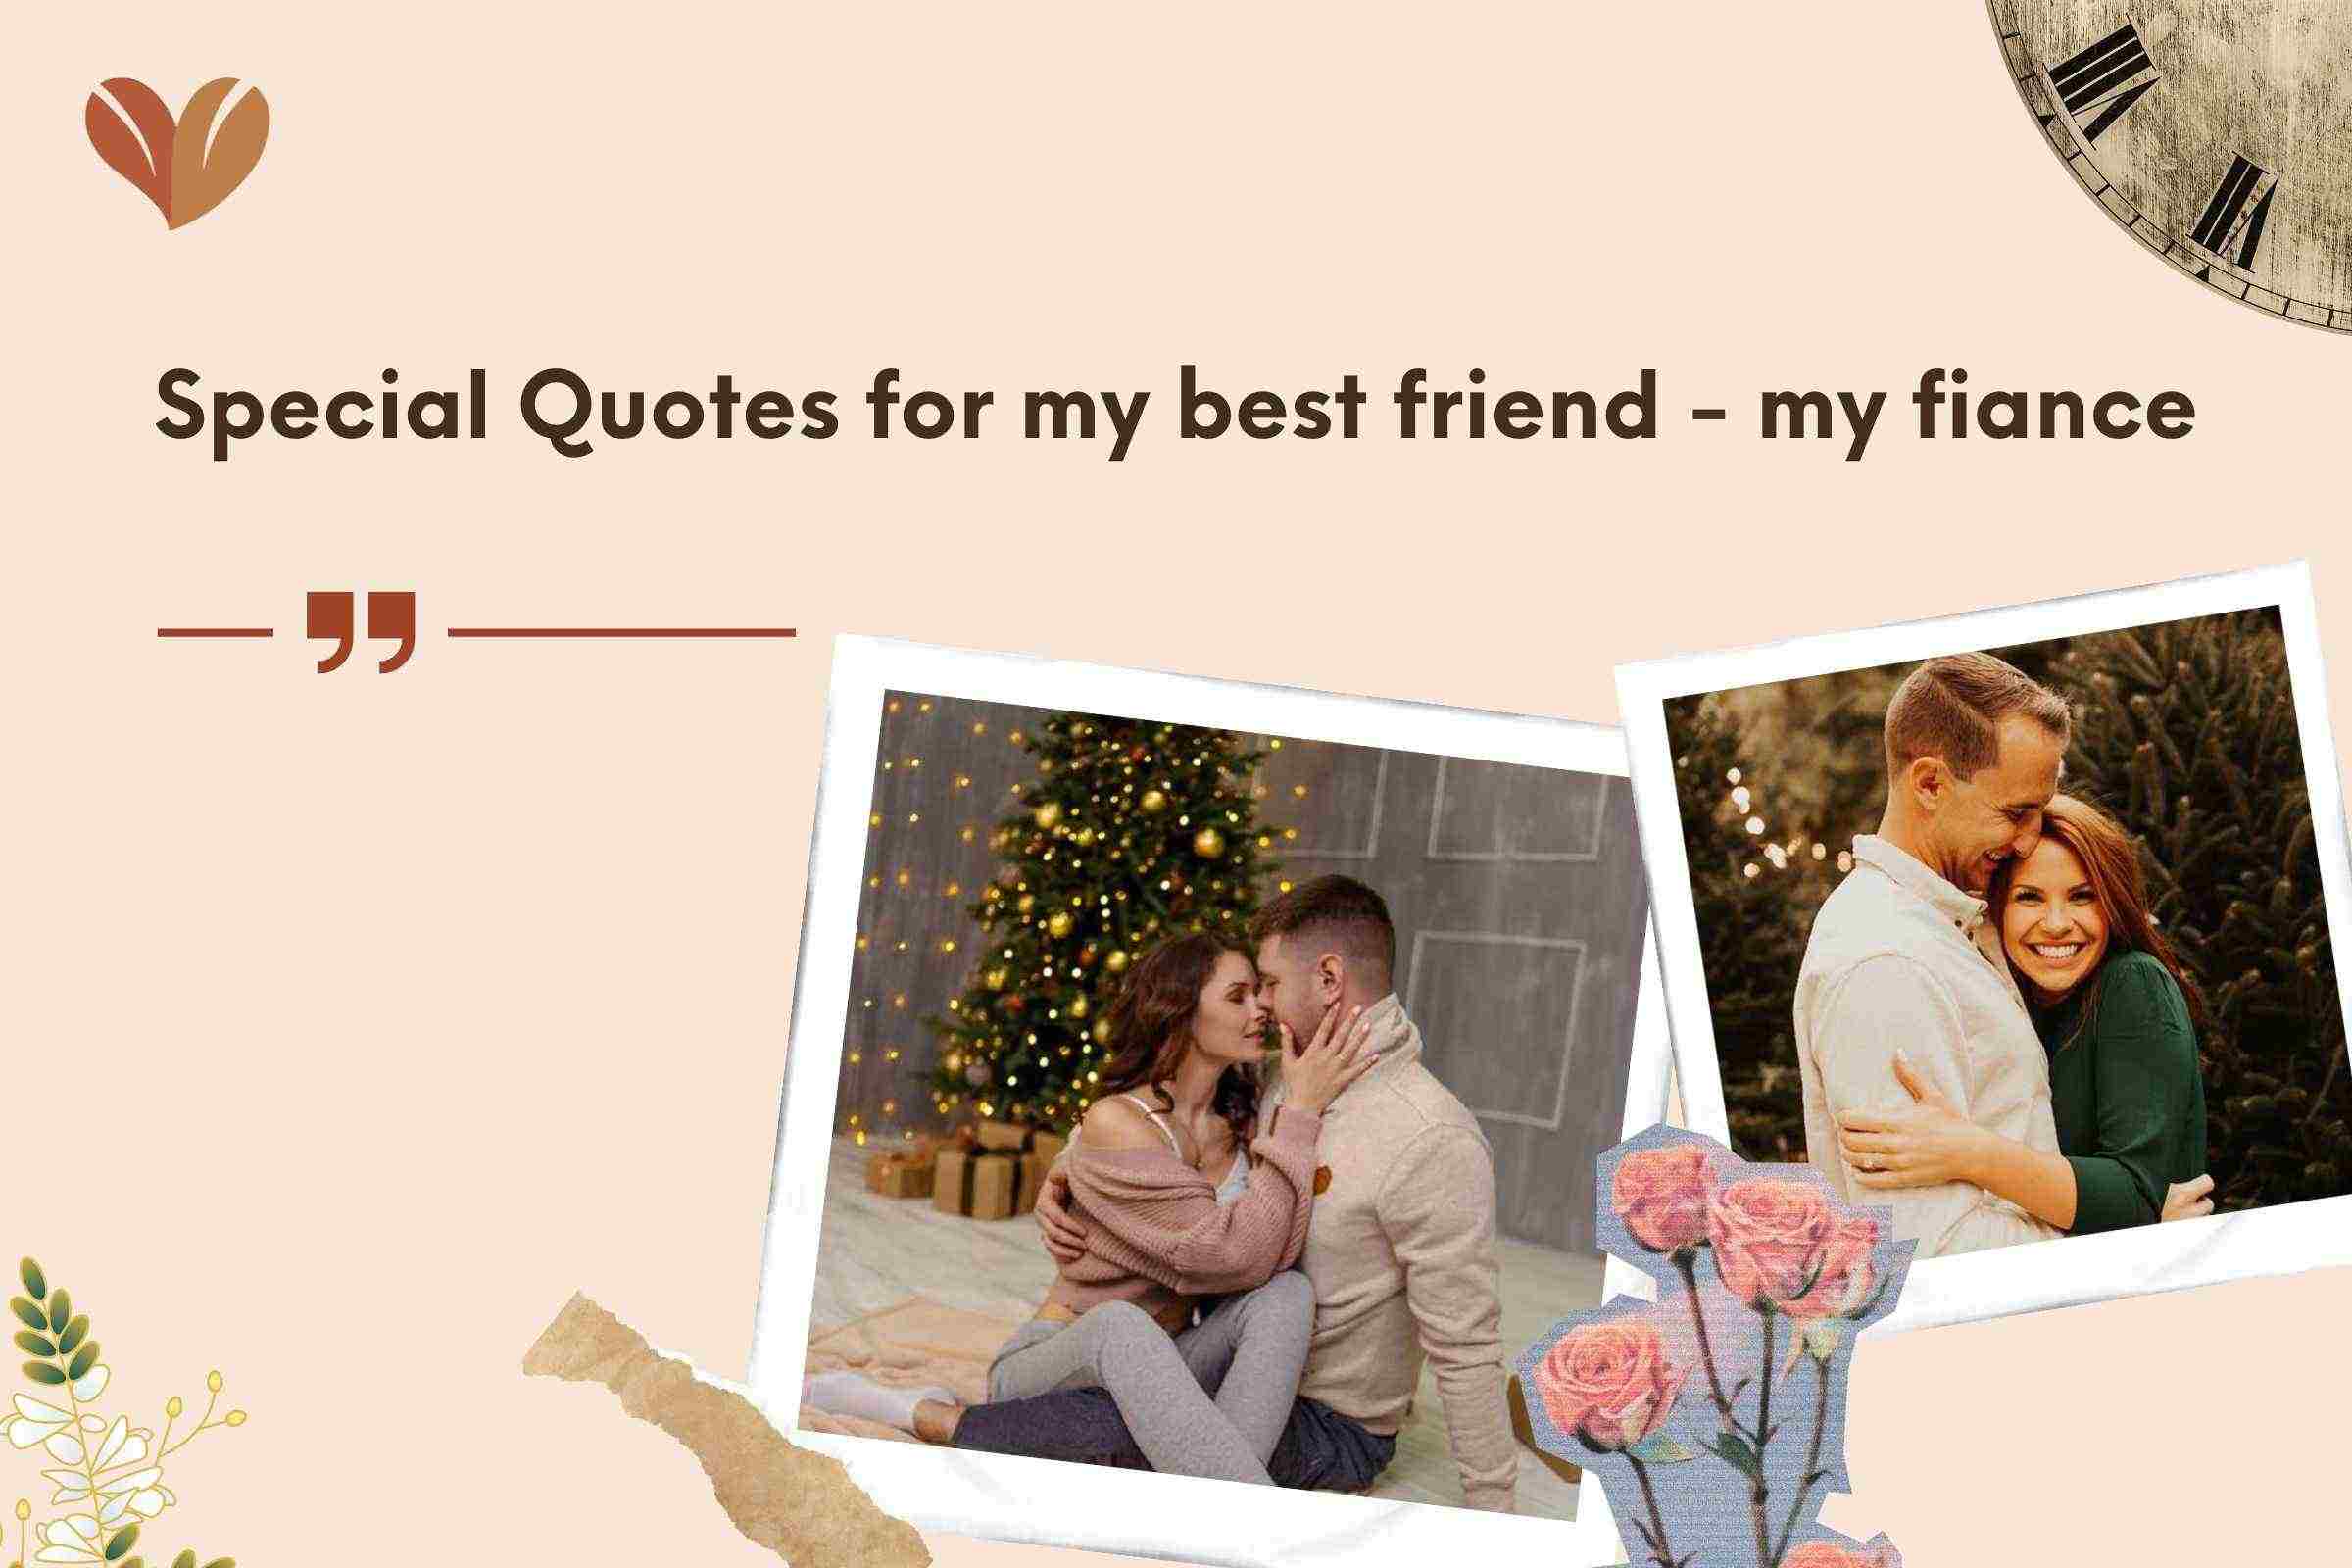 Special Quotes for my best friend - my fiance